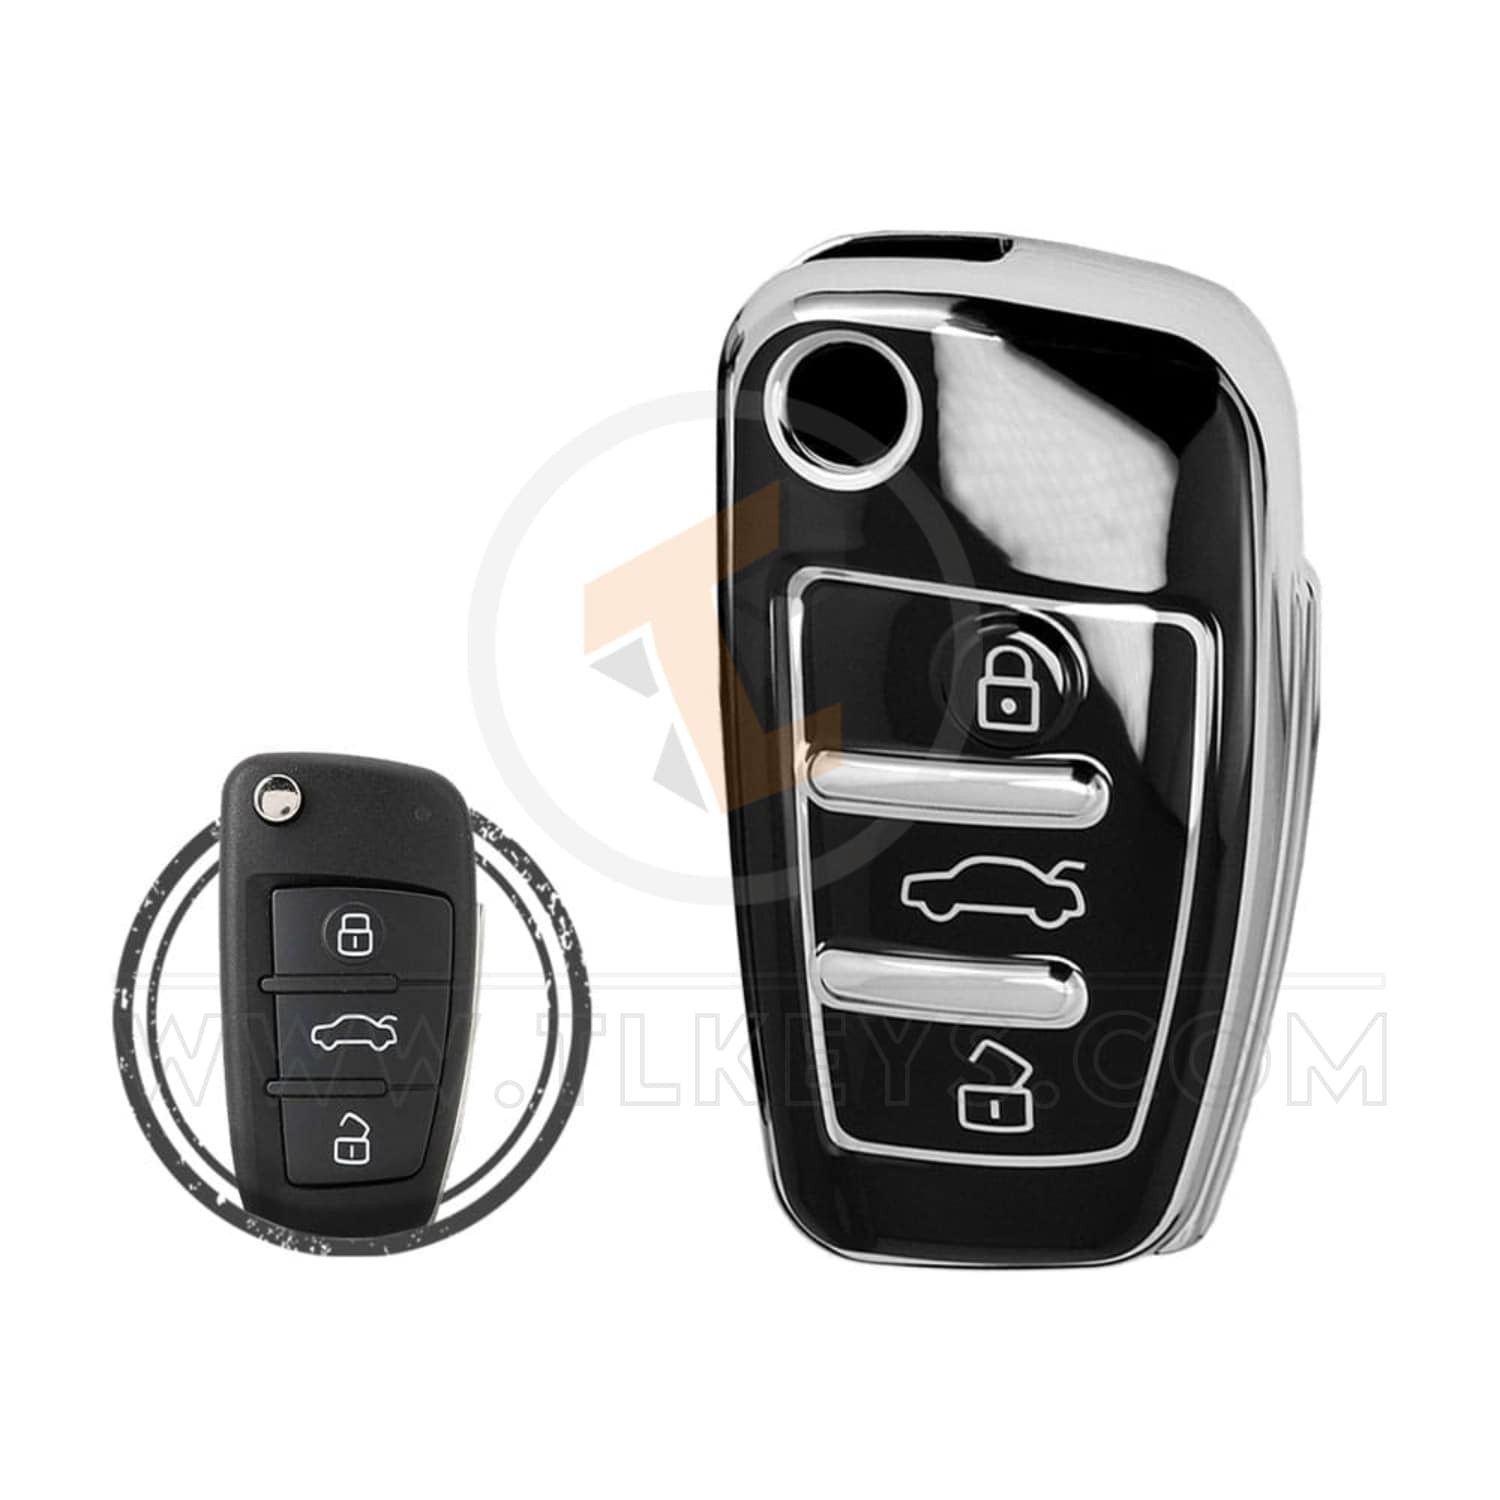 TPU Car Key Cover Case Compatible With Audi Status Aftermarket